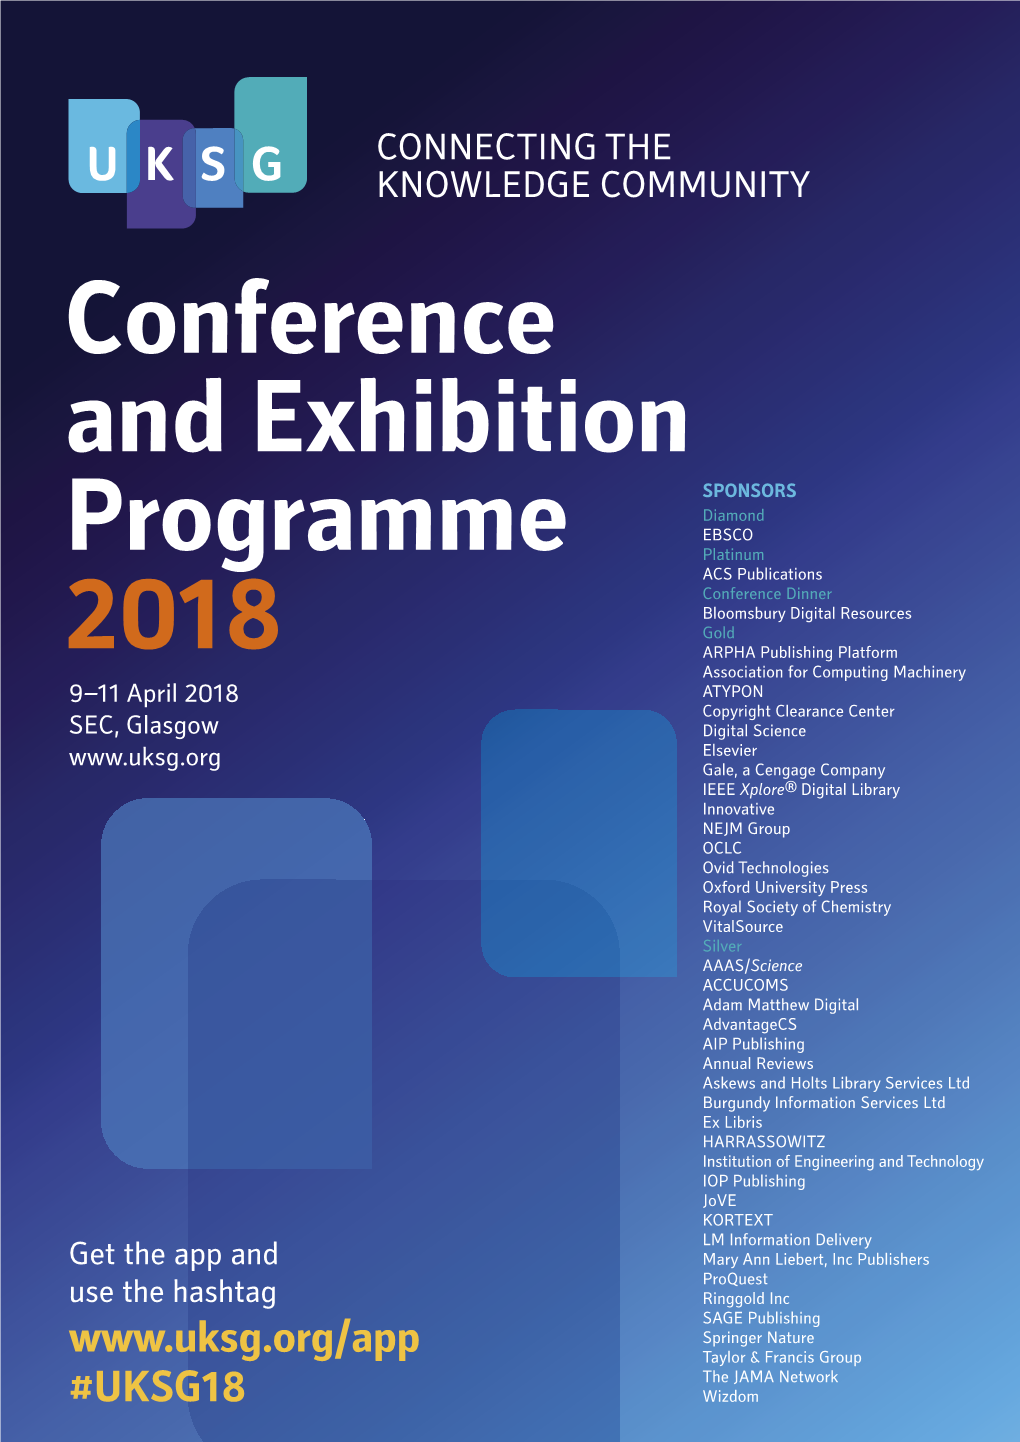 Conference and Exhibition Programme 2018